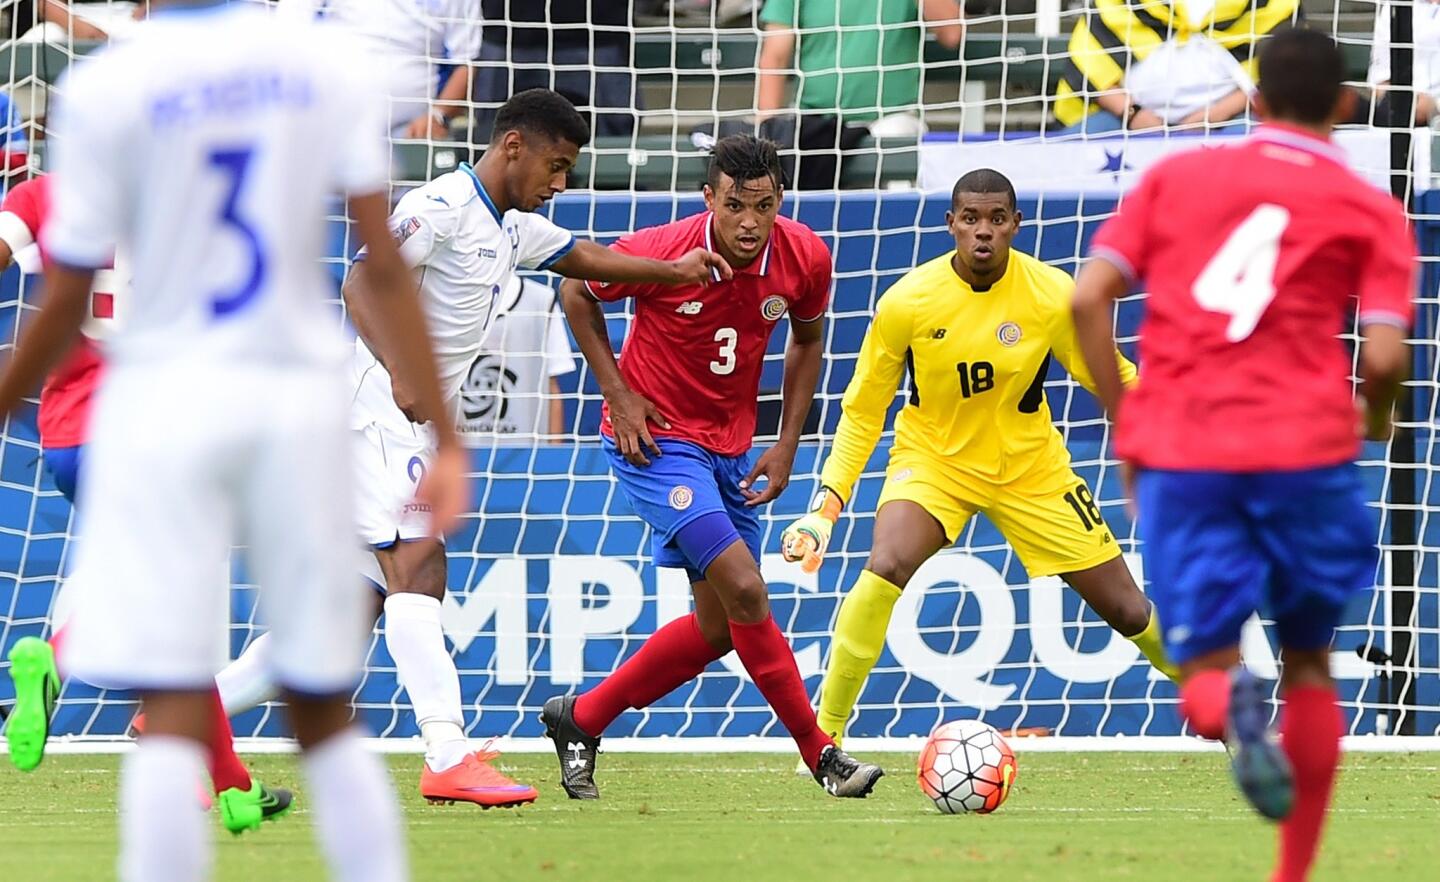 Anthony Lozano of Honduras winds up his shot to score for a 1-0 lead as Julio Cascante (#3) and goalkeeper Darryl Parker of Costa Rica look on on October 4, 2015 in Carson, California during their CONCACAF Men's Olympic qualifying match. AFP PHOTO / FREDERIC J. BROWNFREDERIC J. BROWN/AFP/Getty Images ** OUTS - ELSENT, FPG, CM - OUTS * NM, PH, VA if sourced by CT, LA or MoD **